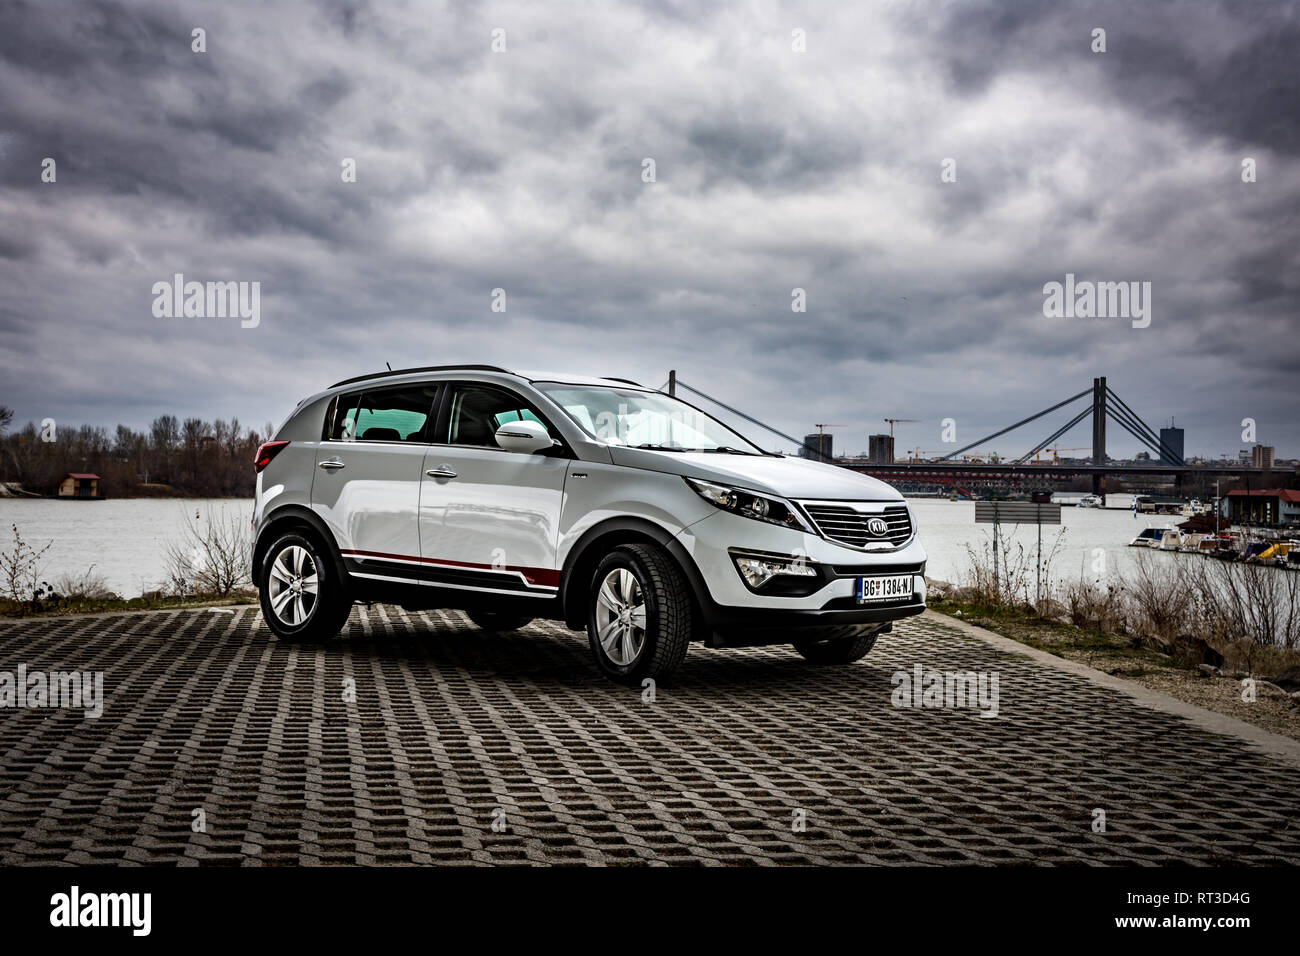 SUV Kia Sportage 2.0 CRDI awd or 4x4, white color, parked on the banks of the river Sava, on the stormy weather with gloomy clouds. Stock Photo